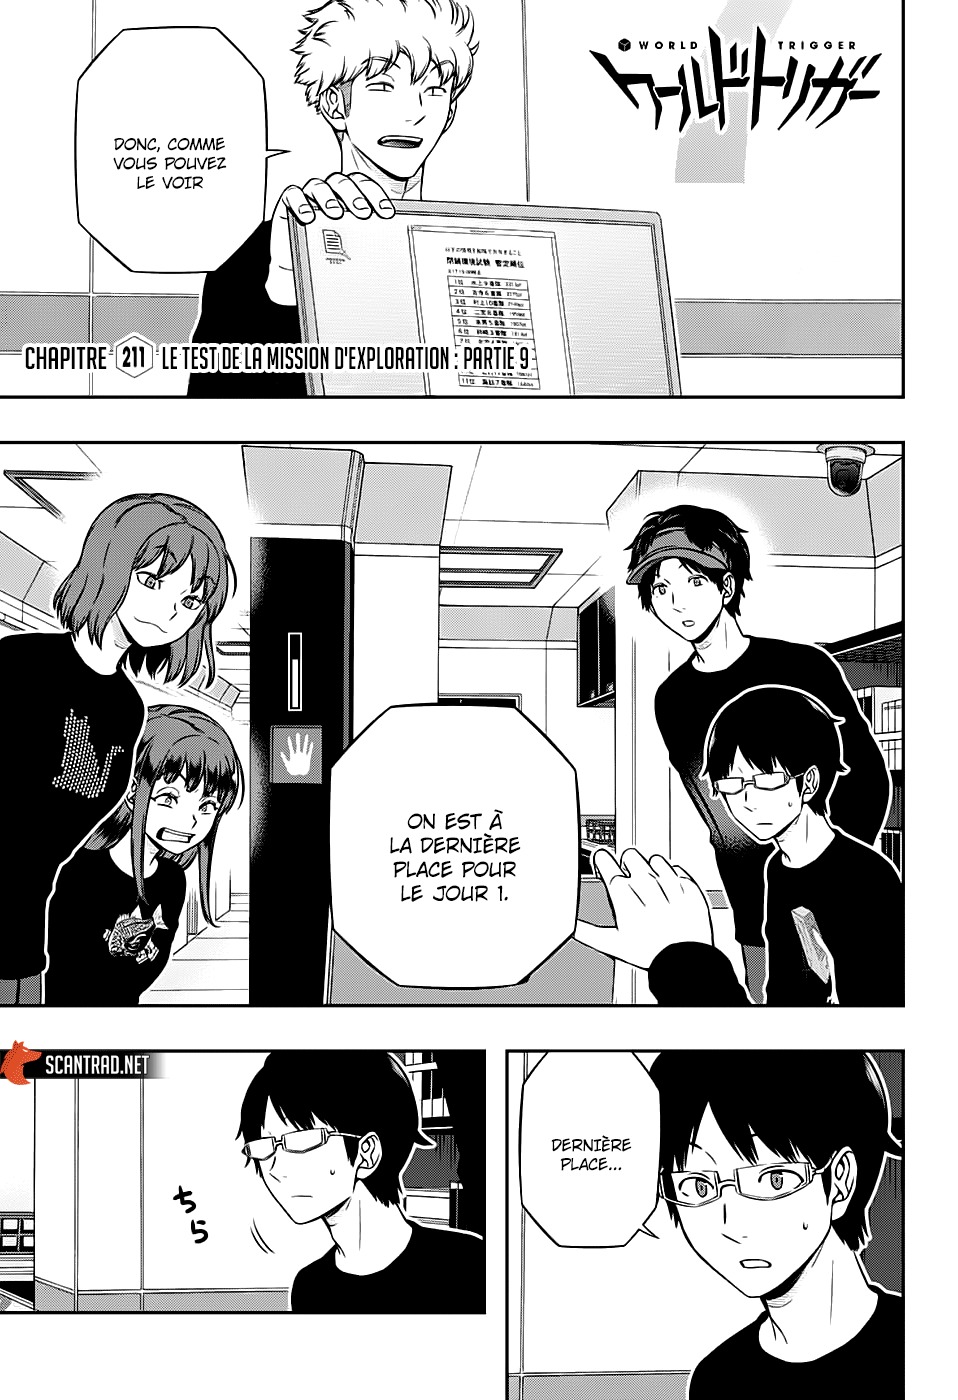 World Trigger: Chapter 211 - Page 1